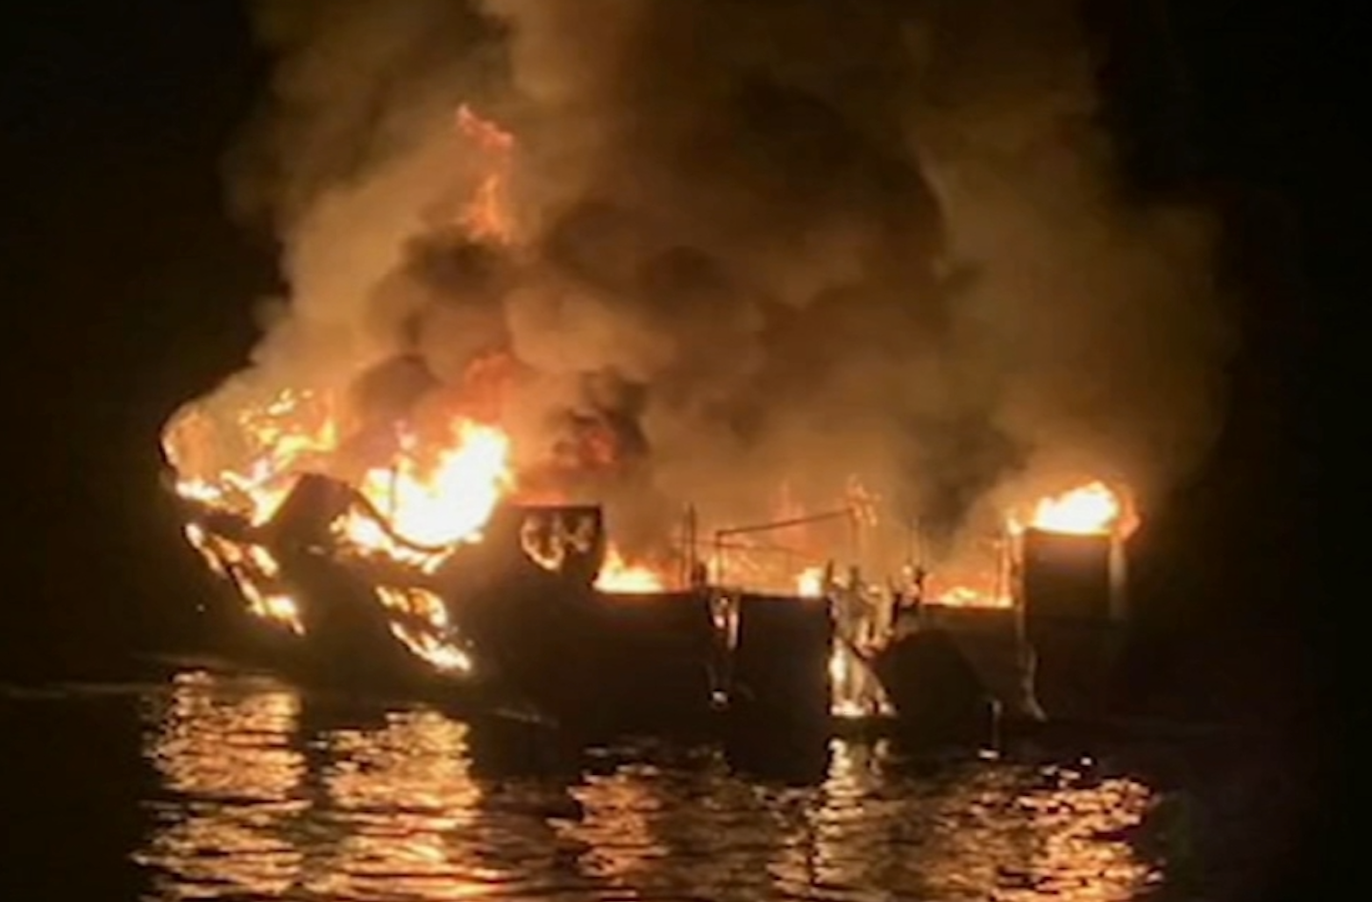 Dive-boat fire, Conception fire, worst maritime casualty